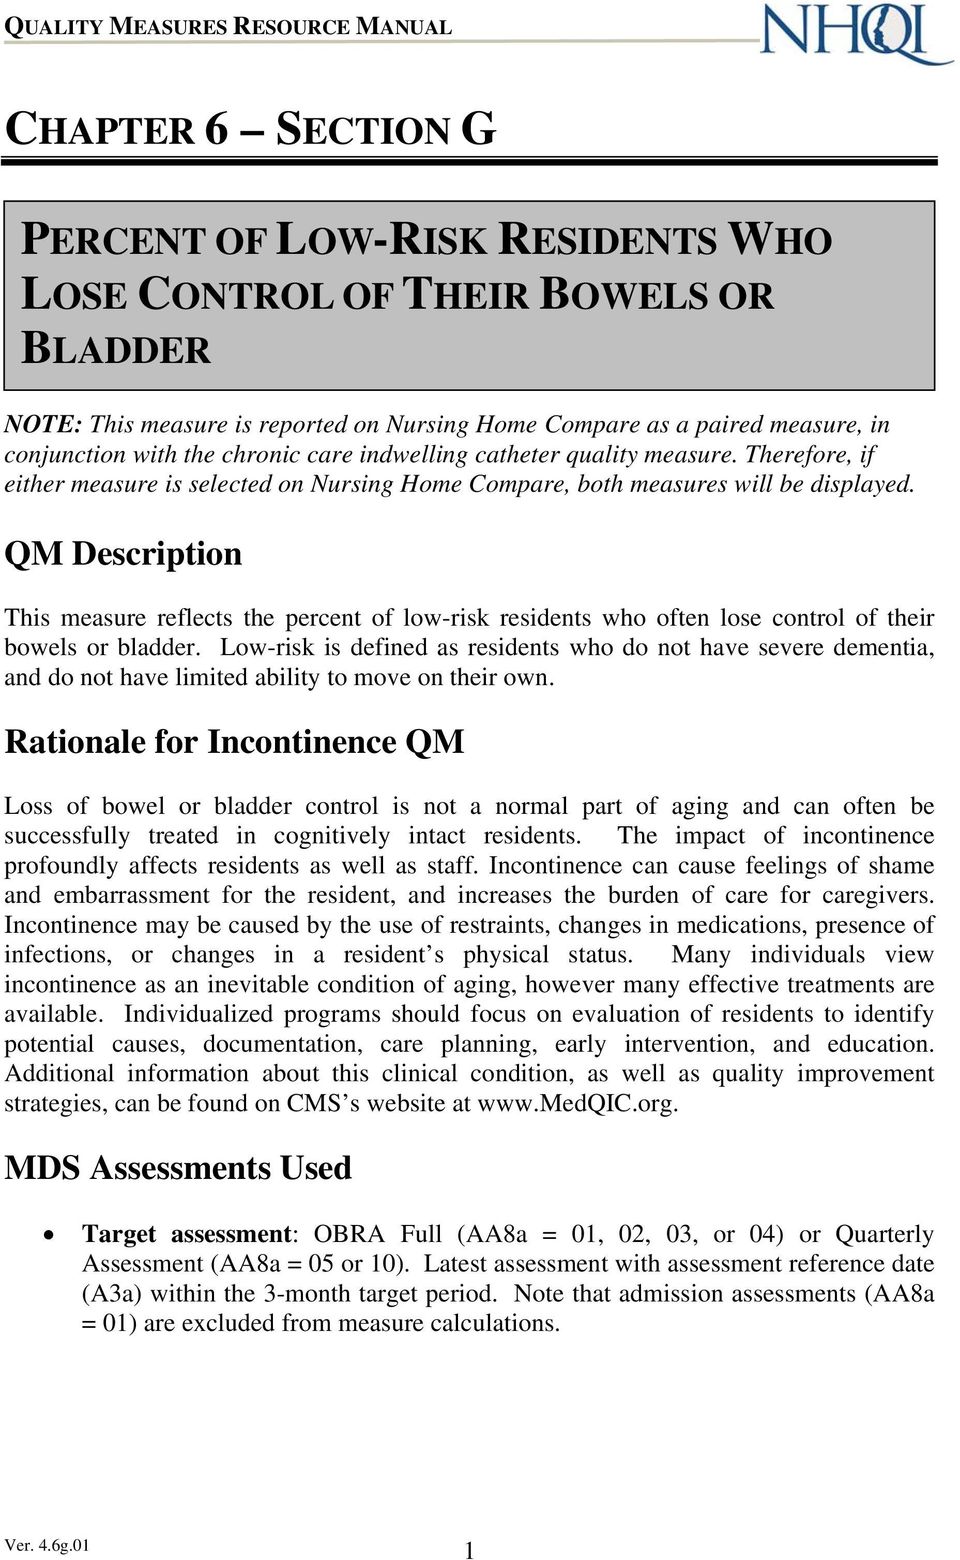 QM Description This measure reflects the percent of low-risk residents who often lose control of their bowels or bladder.